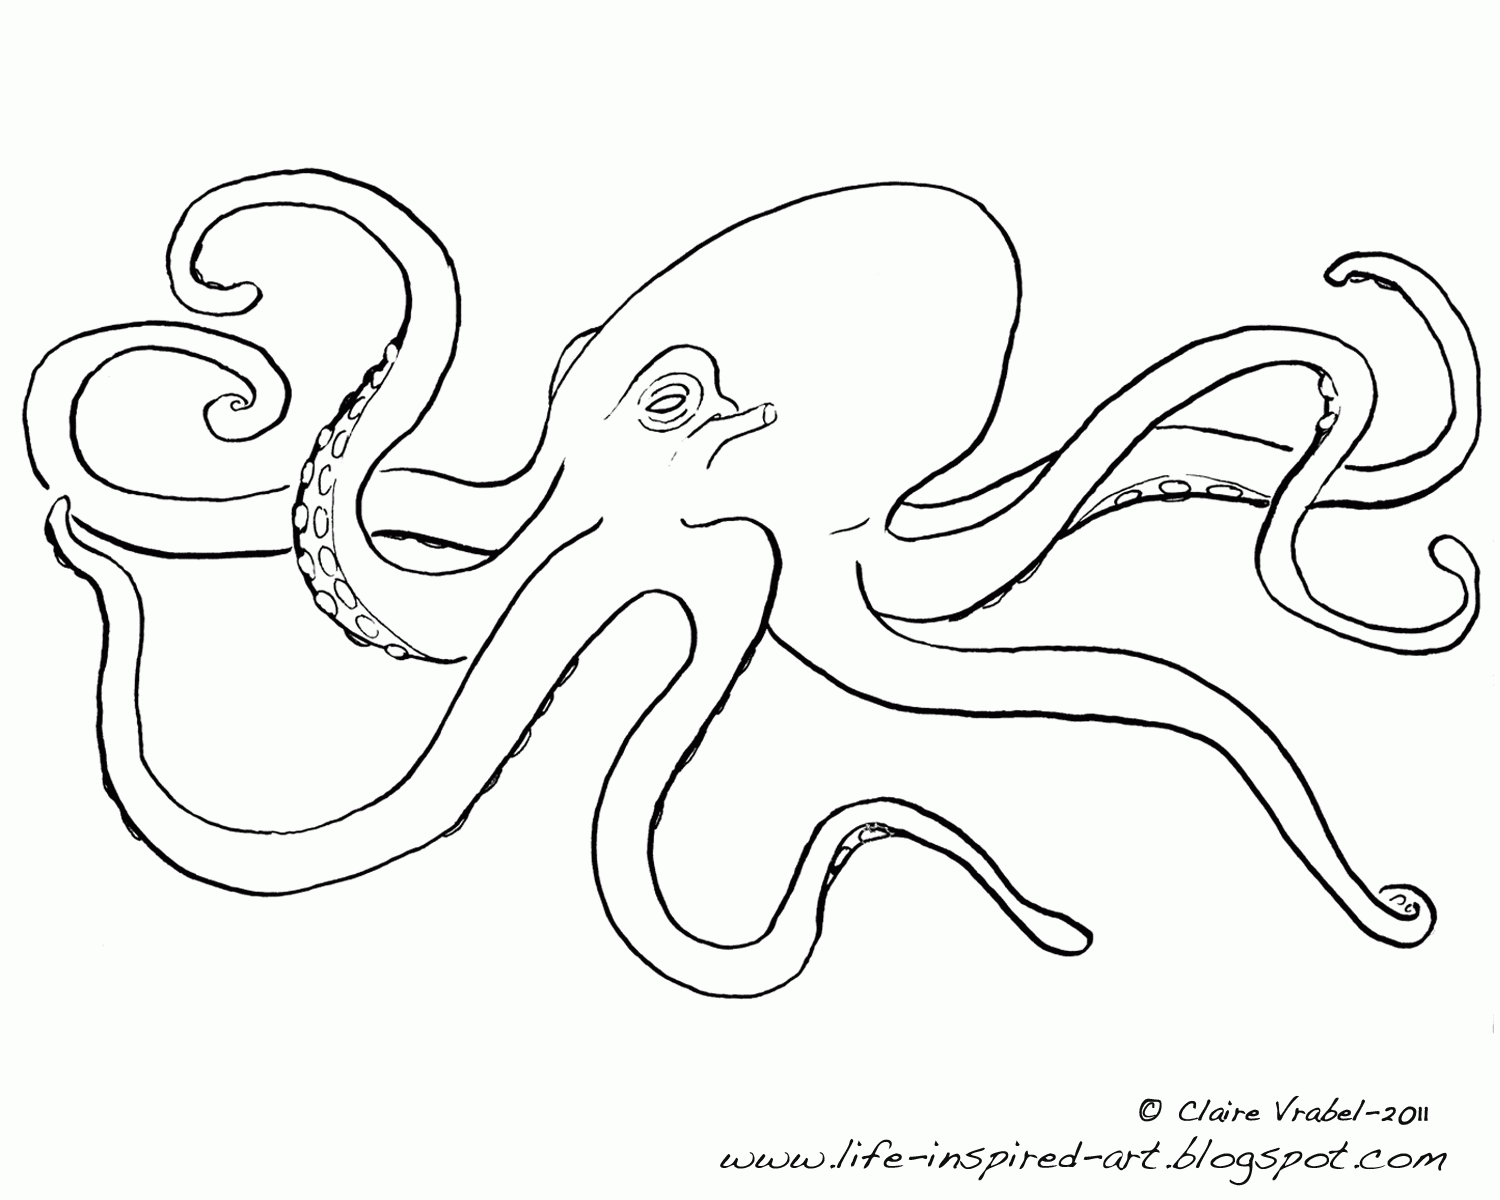 Reading Cute Octopus Coloring Pages Getcoloringpages - Widetheme